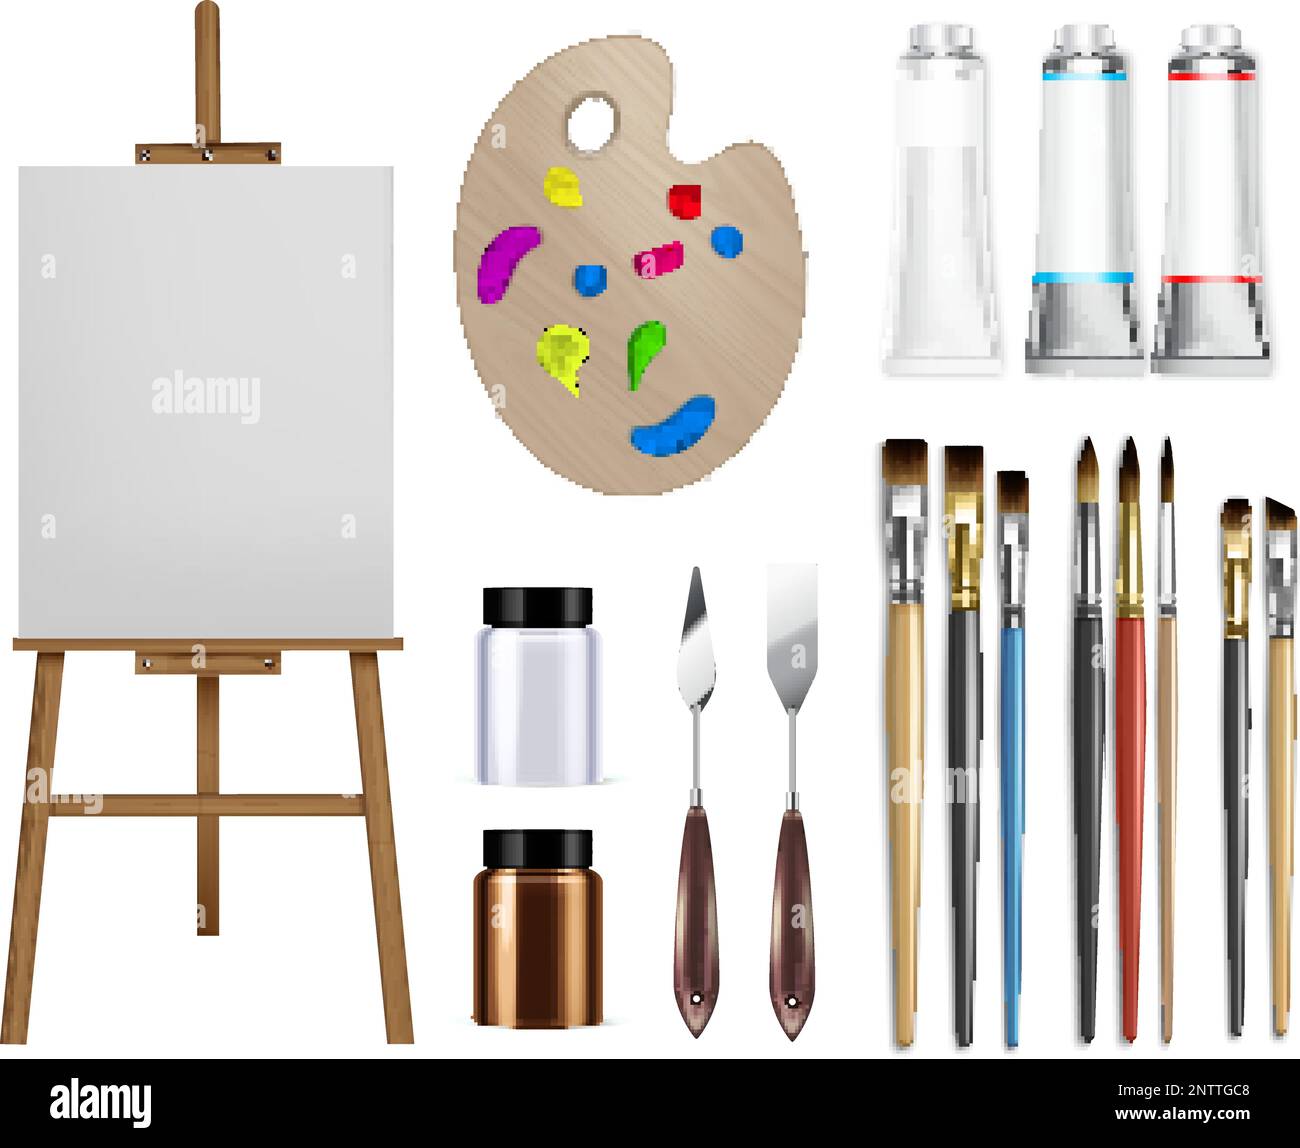 https://c8.alamy.com/comp/2NTTGC8/artist-tools-oil-paint-realistic-set-with-isolated-images-of-paint-brushes-palette-and-drawing-easel-vector-illustration-2NTTGC8.jpg